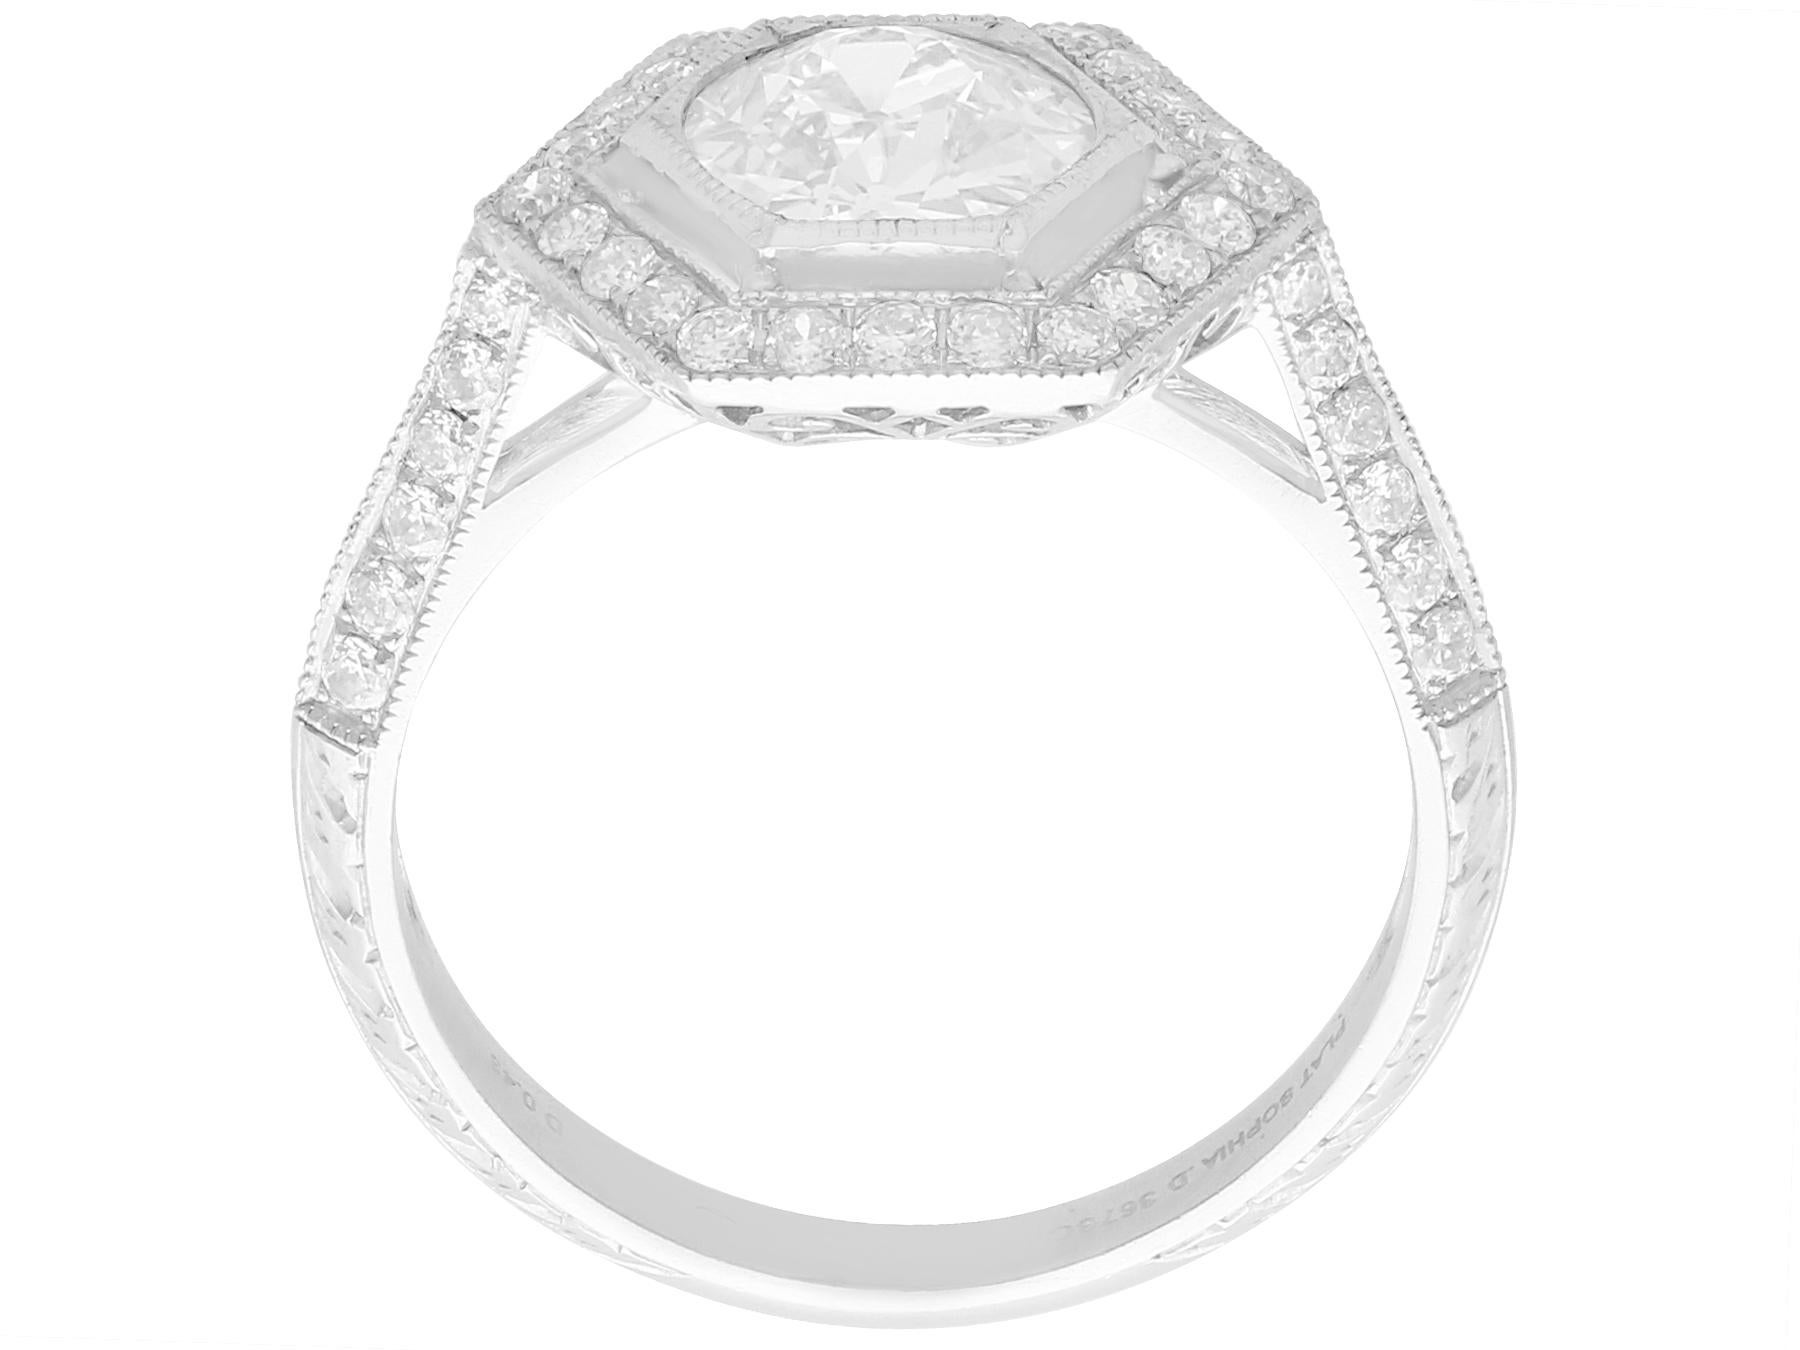 Old European Cut Art Deco Style 1.57 Carat Diamond and Platinum Engagement Ring For Sale